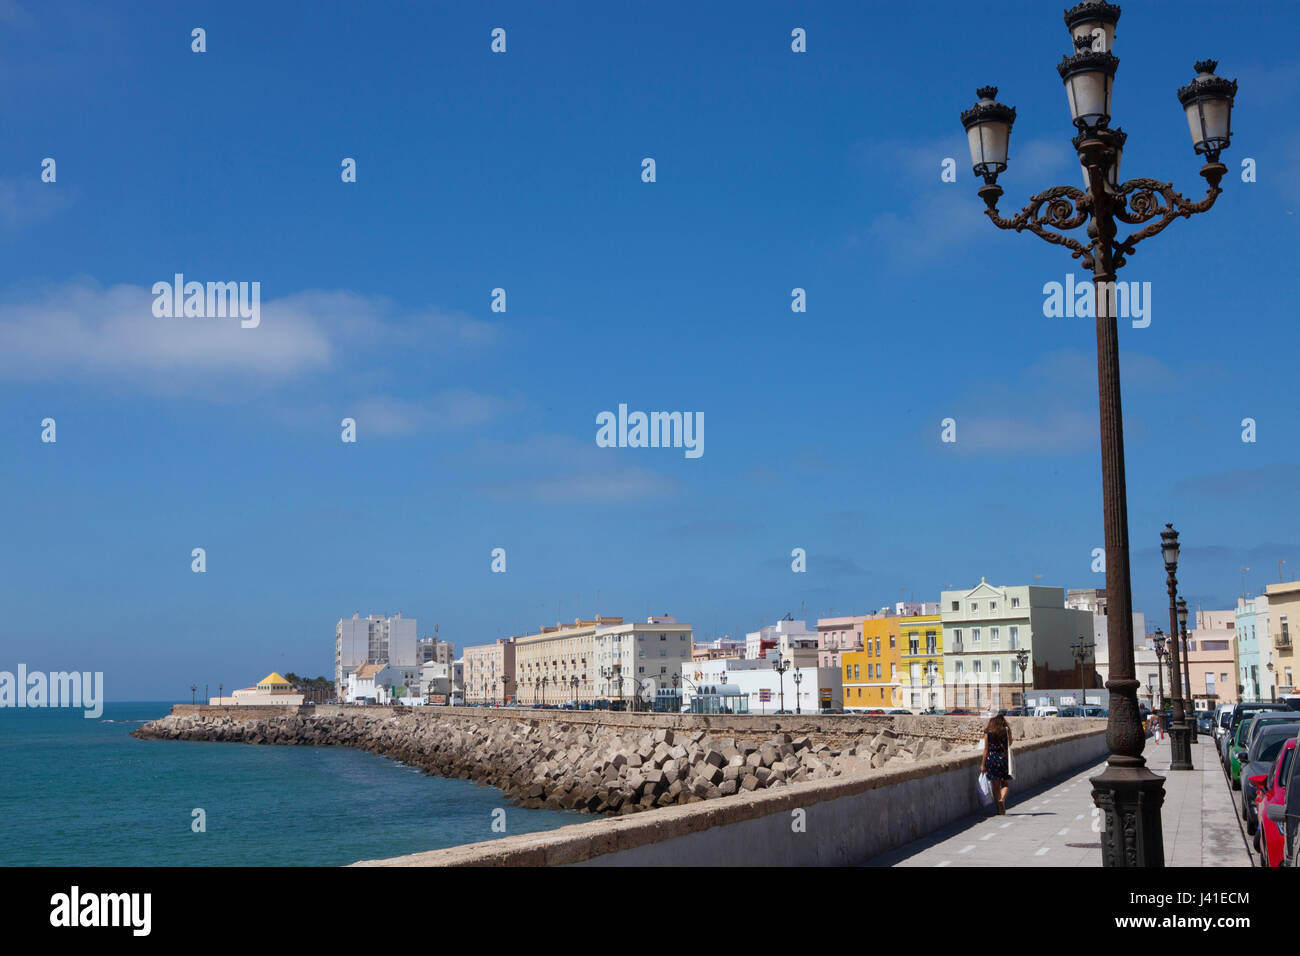 Protective barrier and promenade in the historical town of Cadiz, Cadiz Province, Andalusia, Spain, Europe Stock Photo